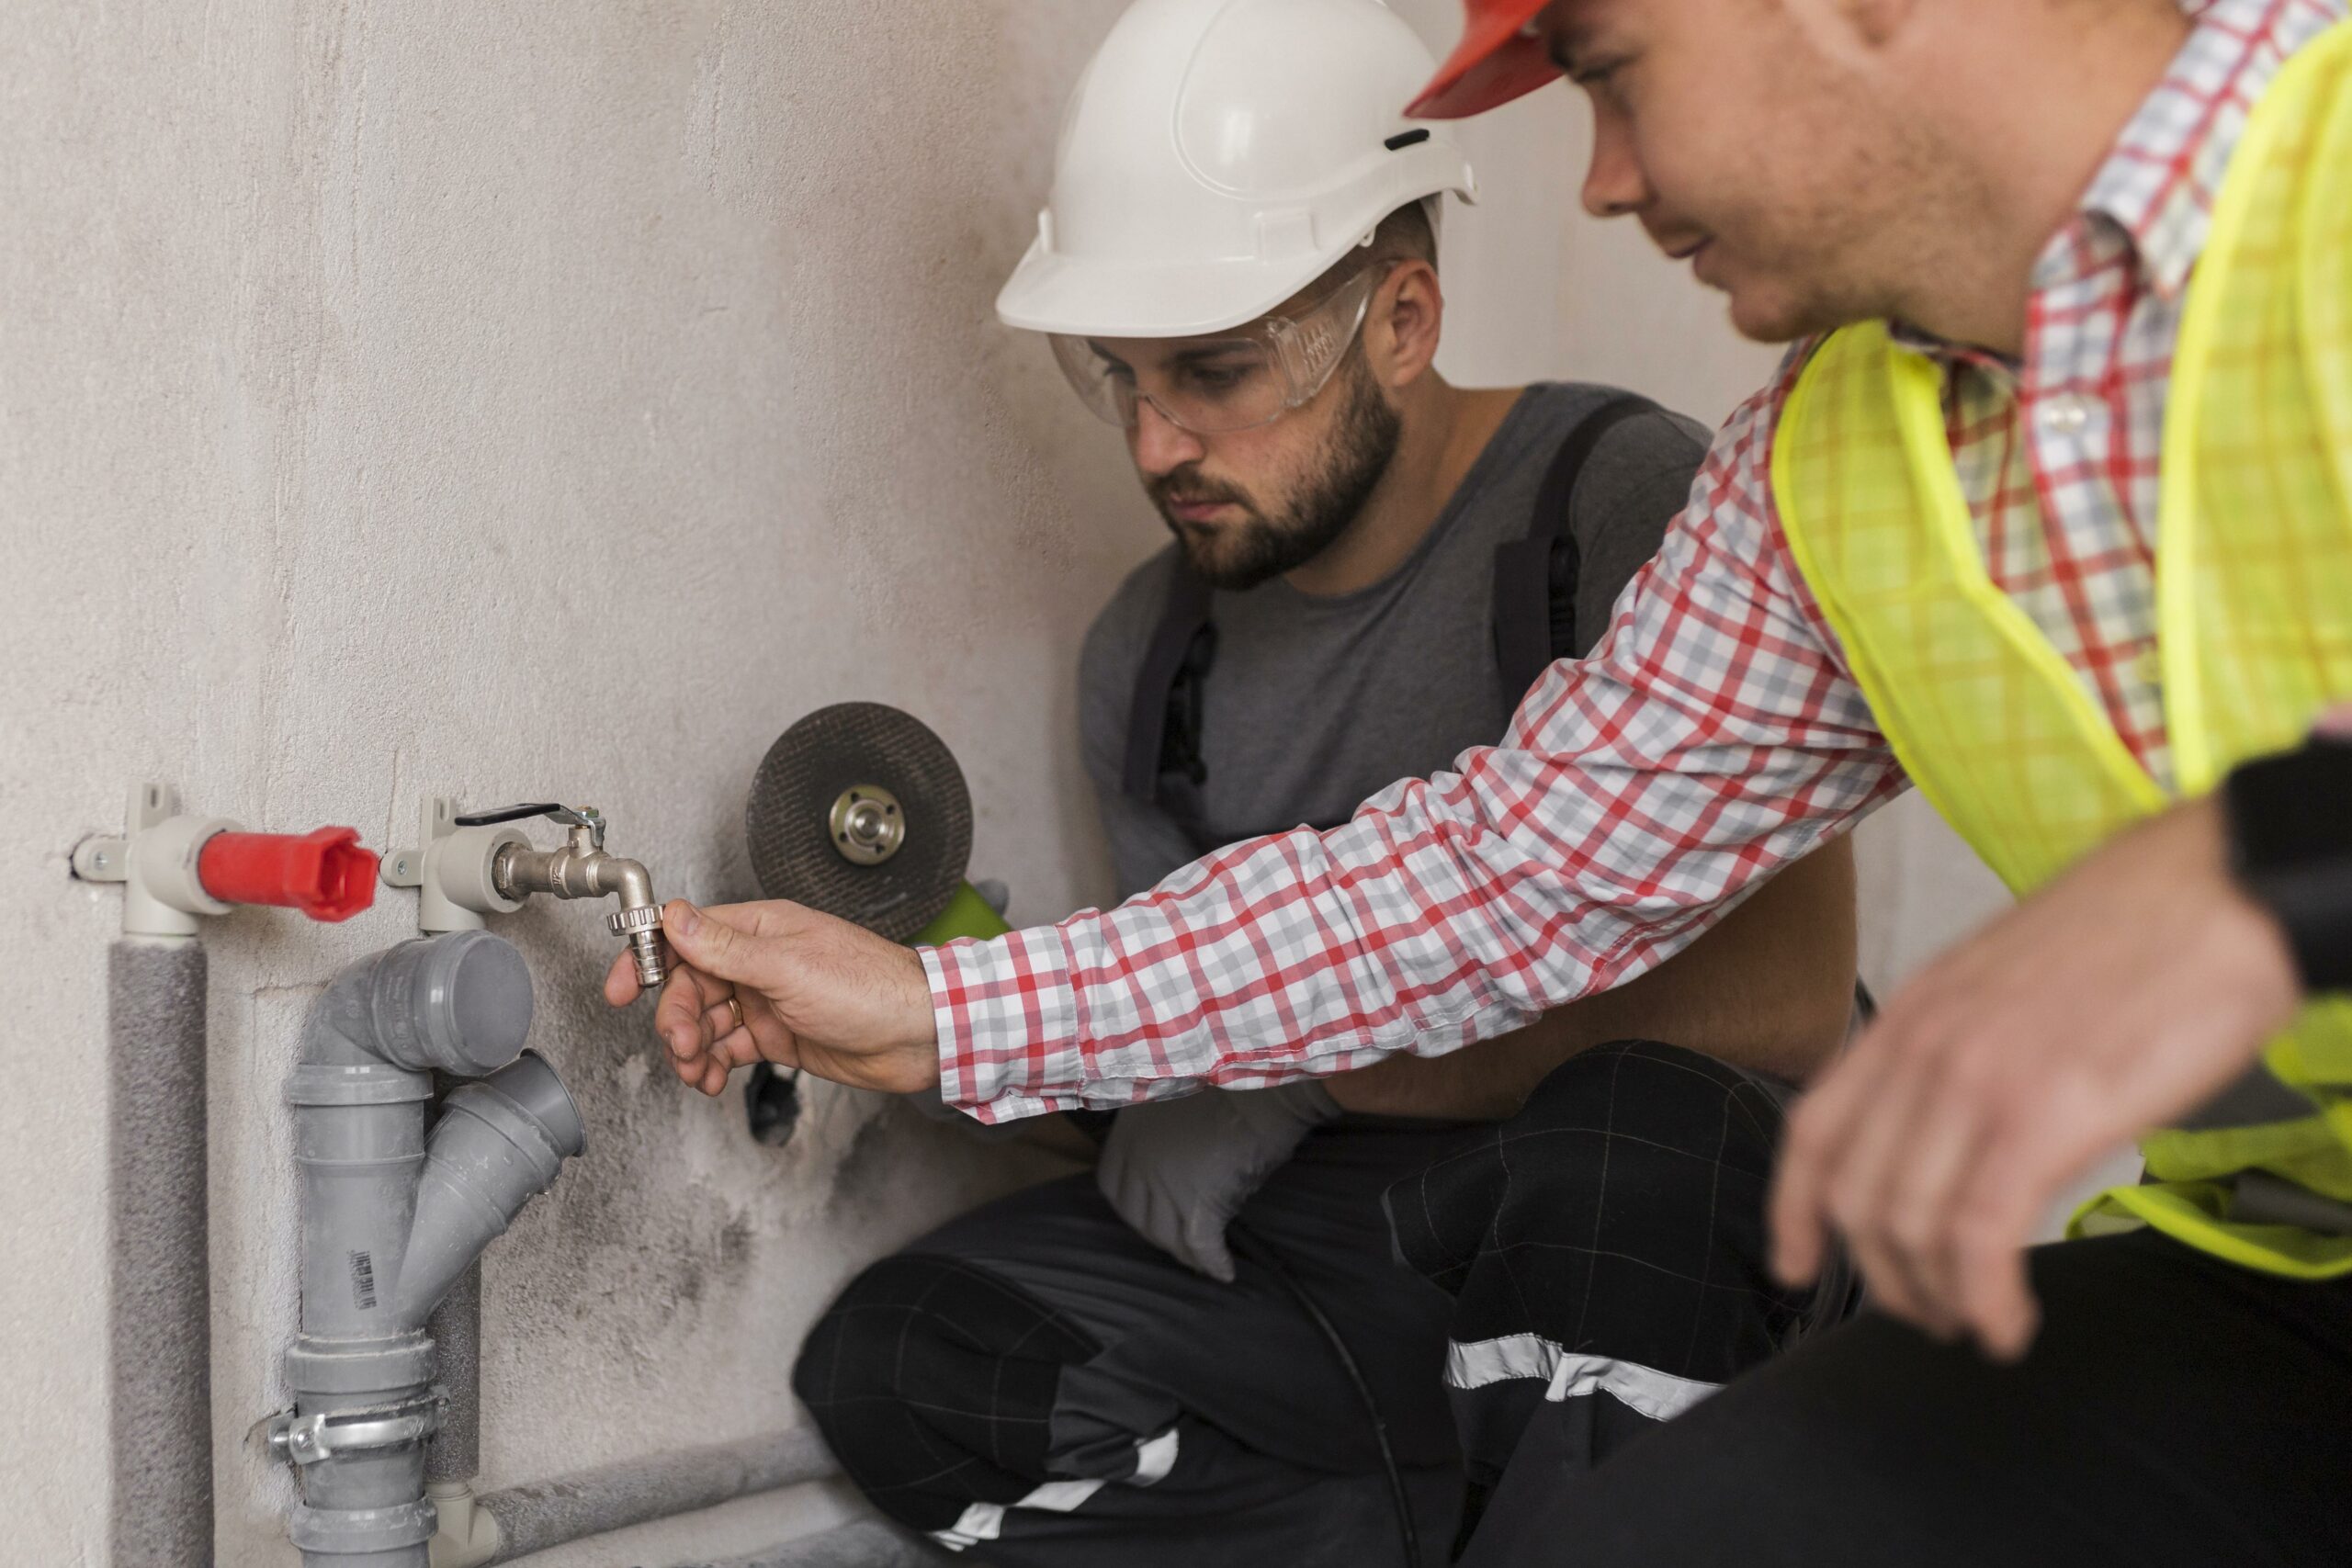 Expert Commercial Plumbing Repair and Installation in BC’s Lower Mainland